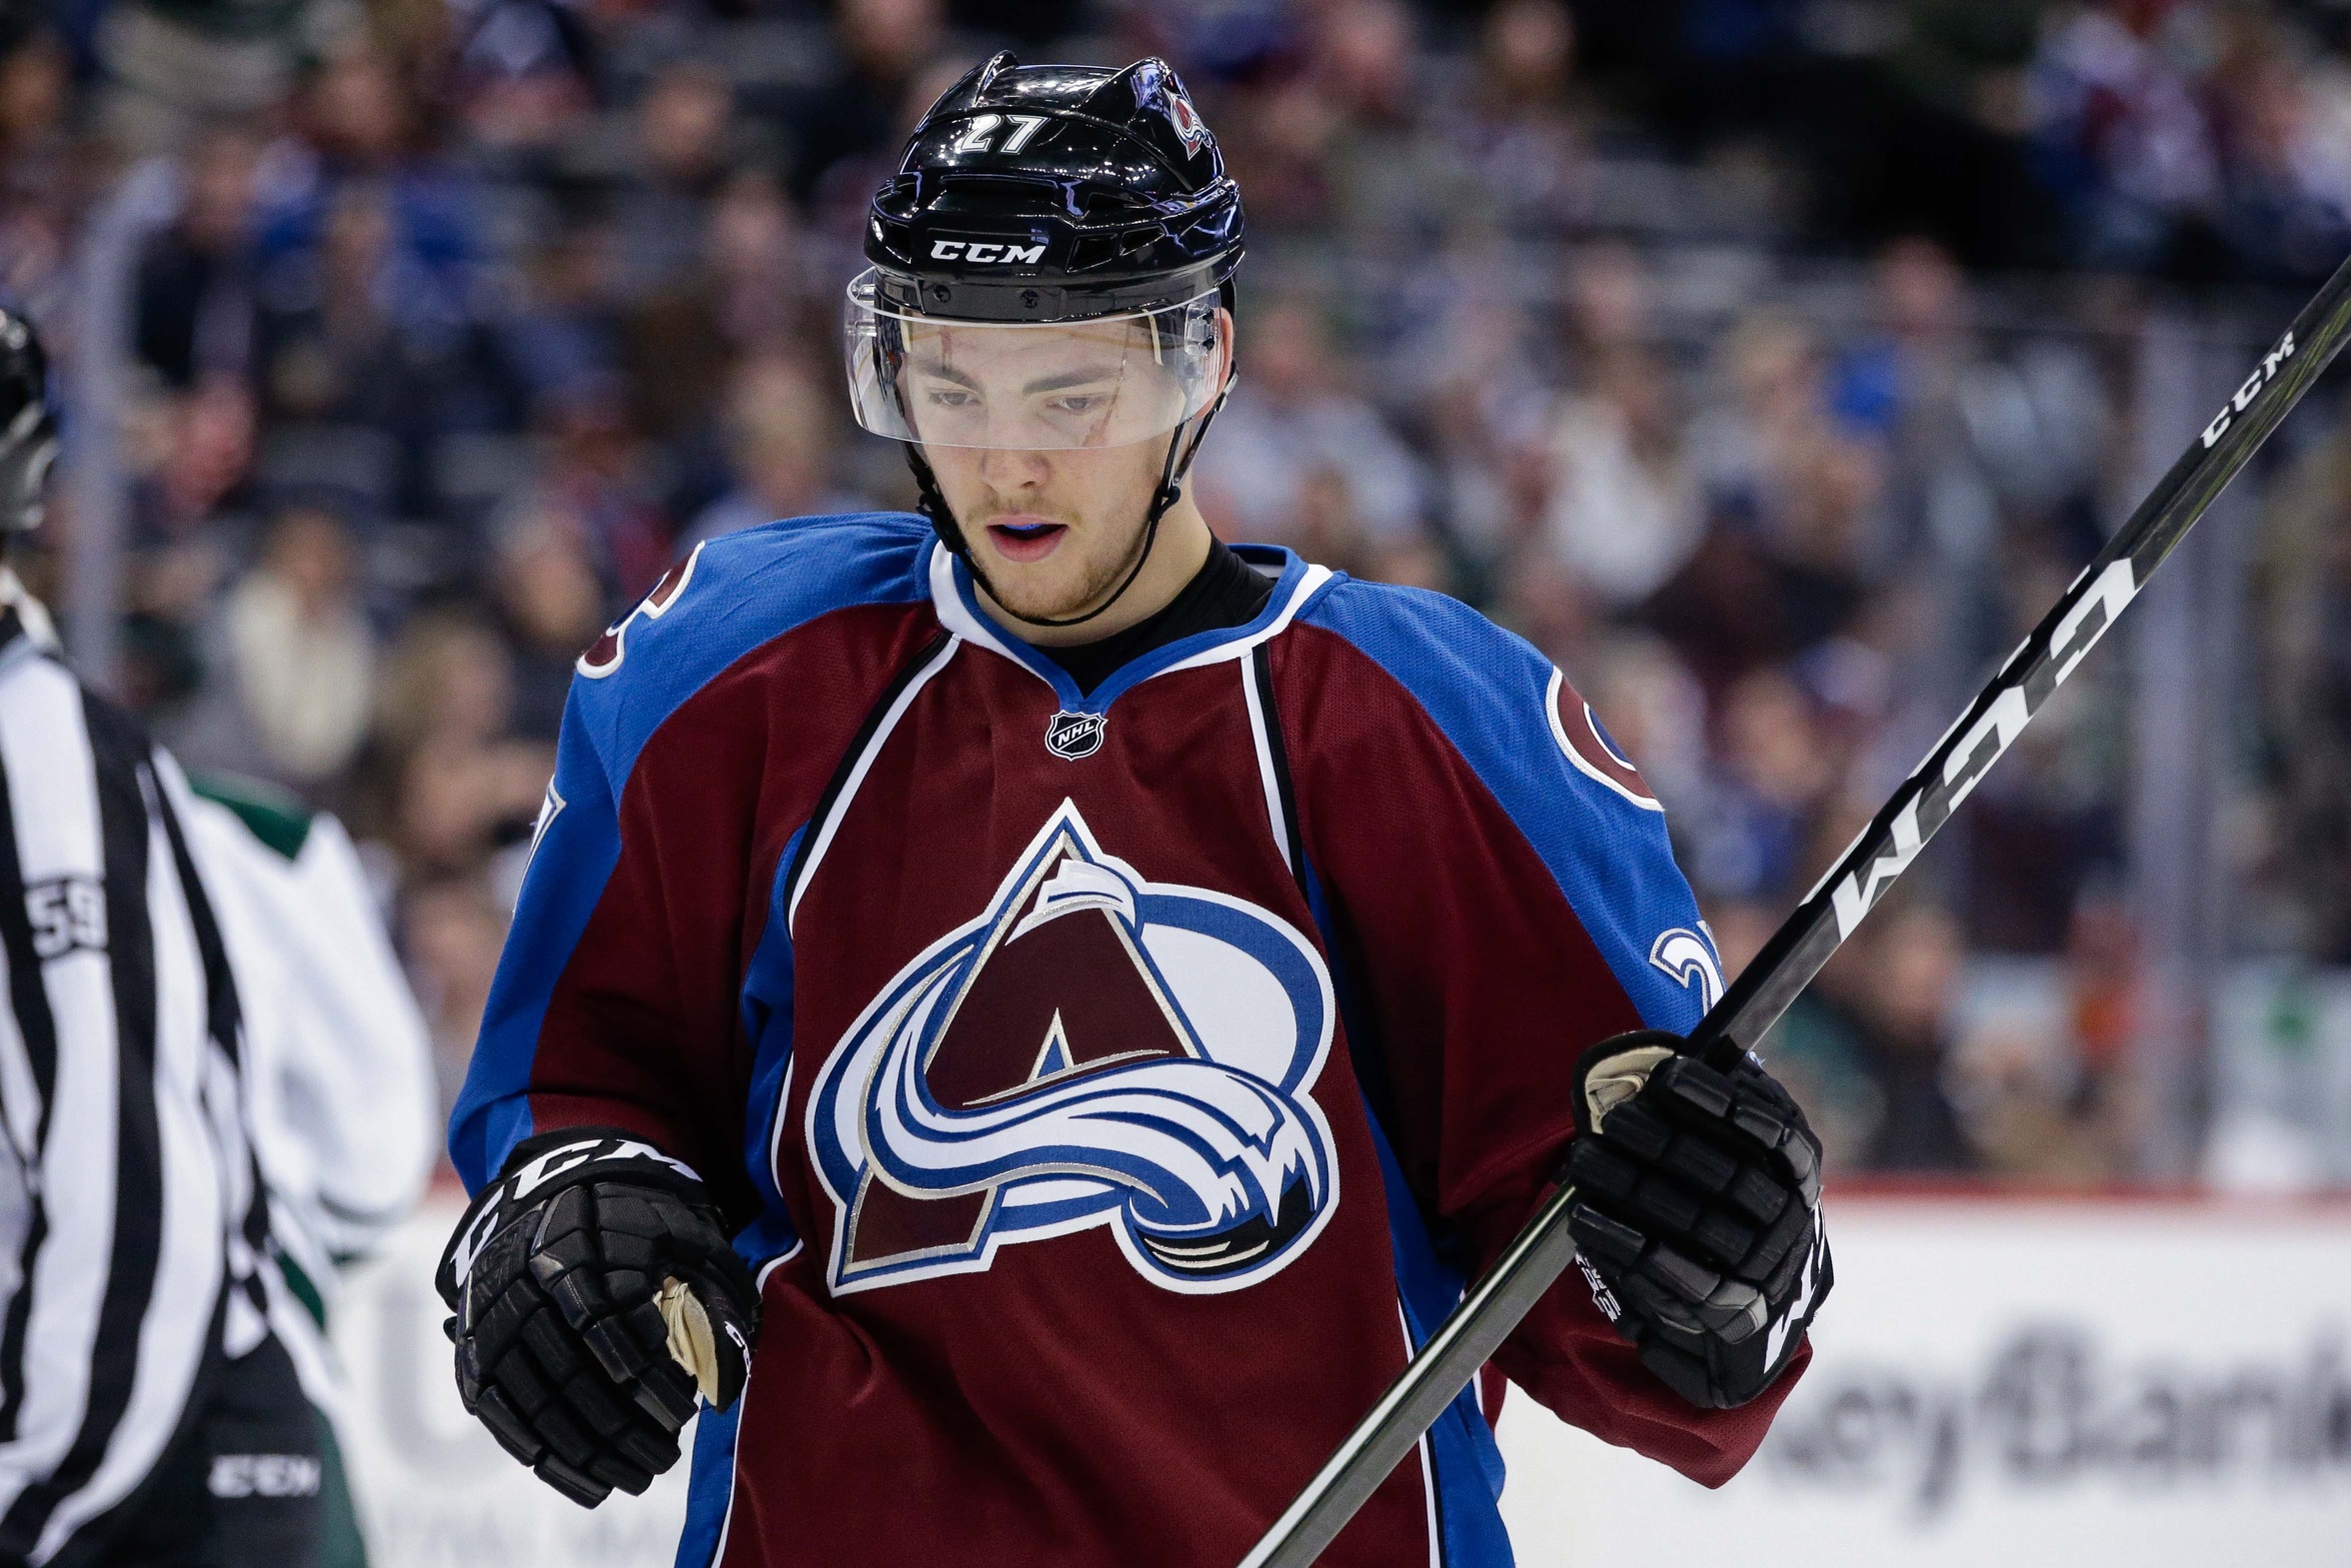 Breaking down the 2017-18 Colorado Avalanche roster - the Forwards